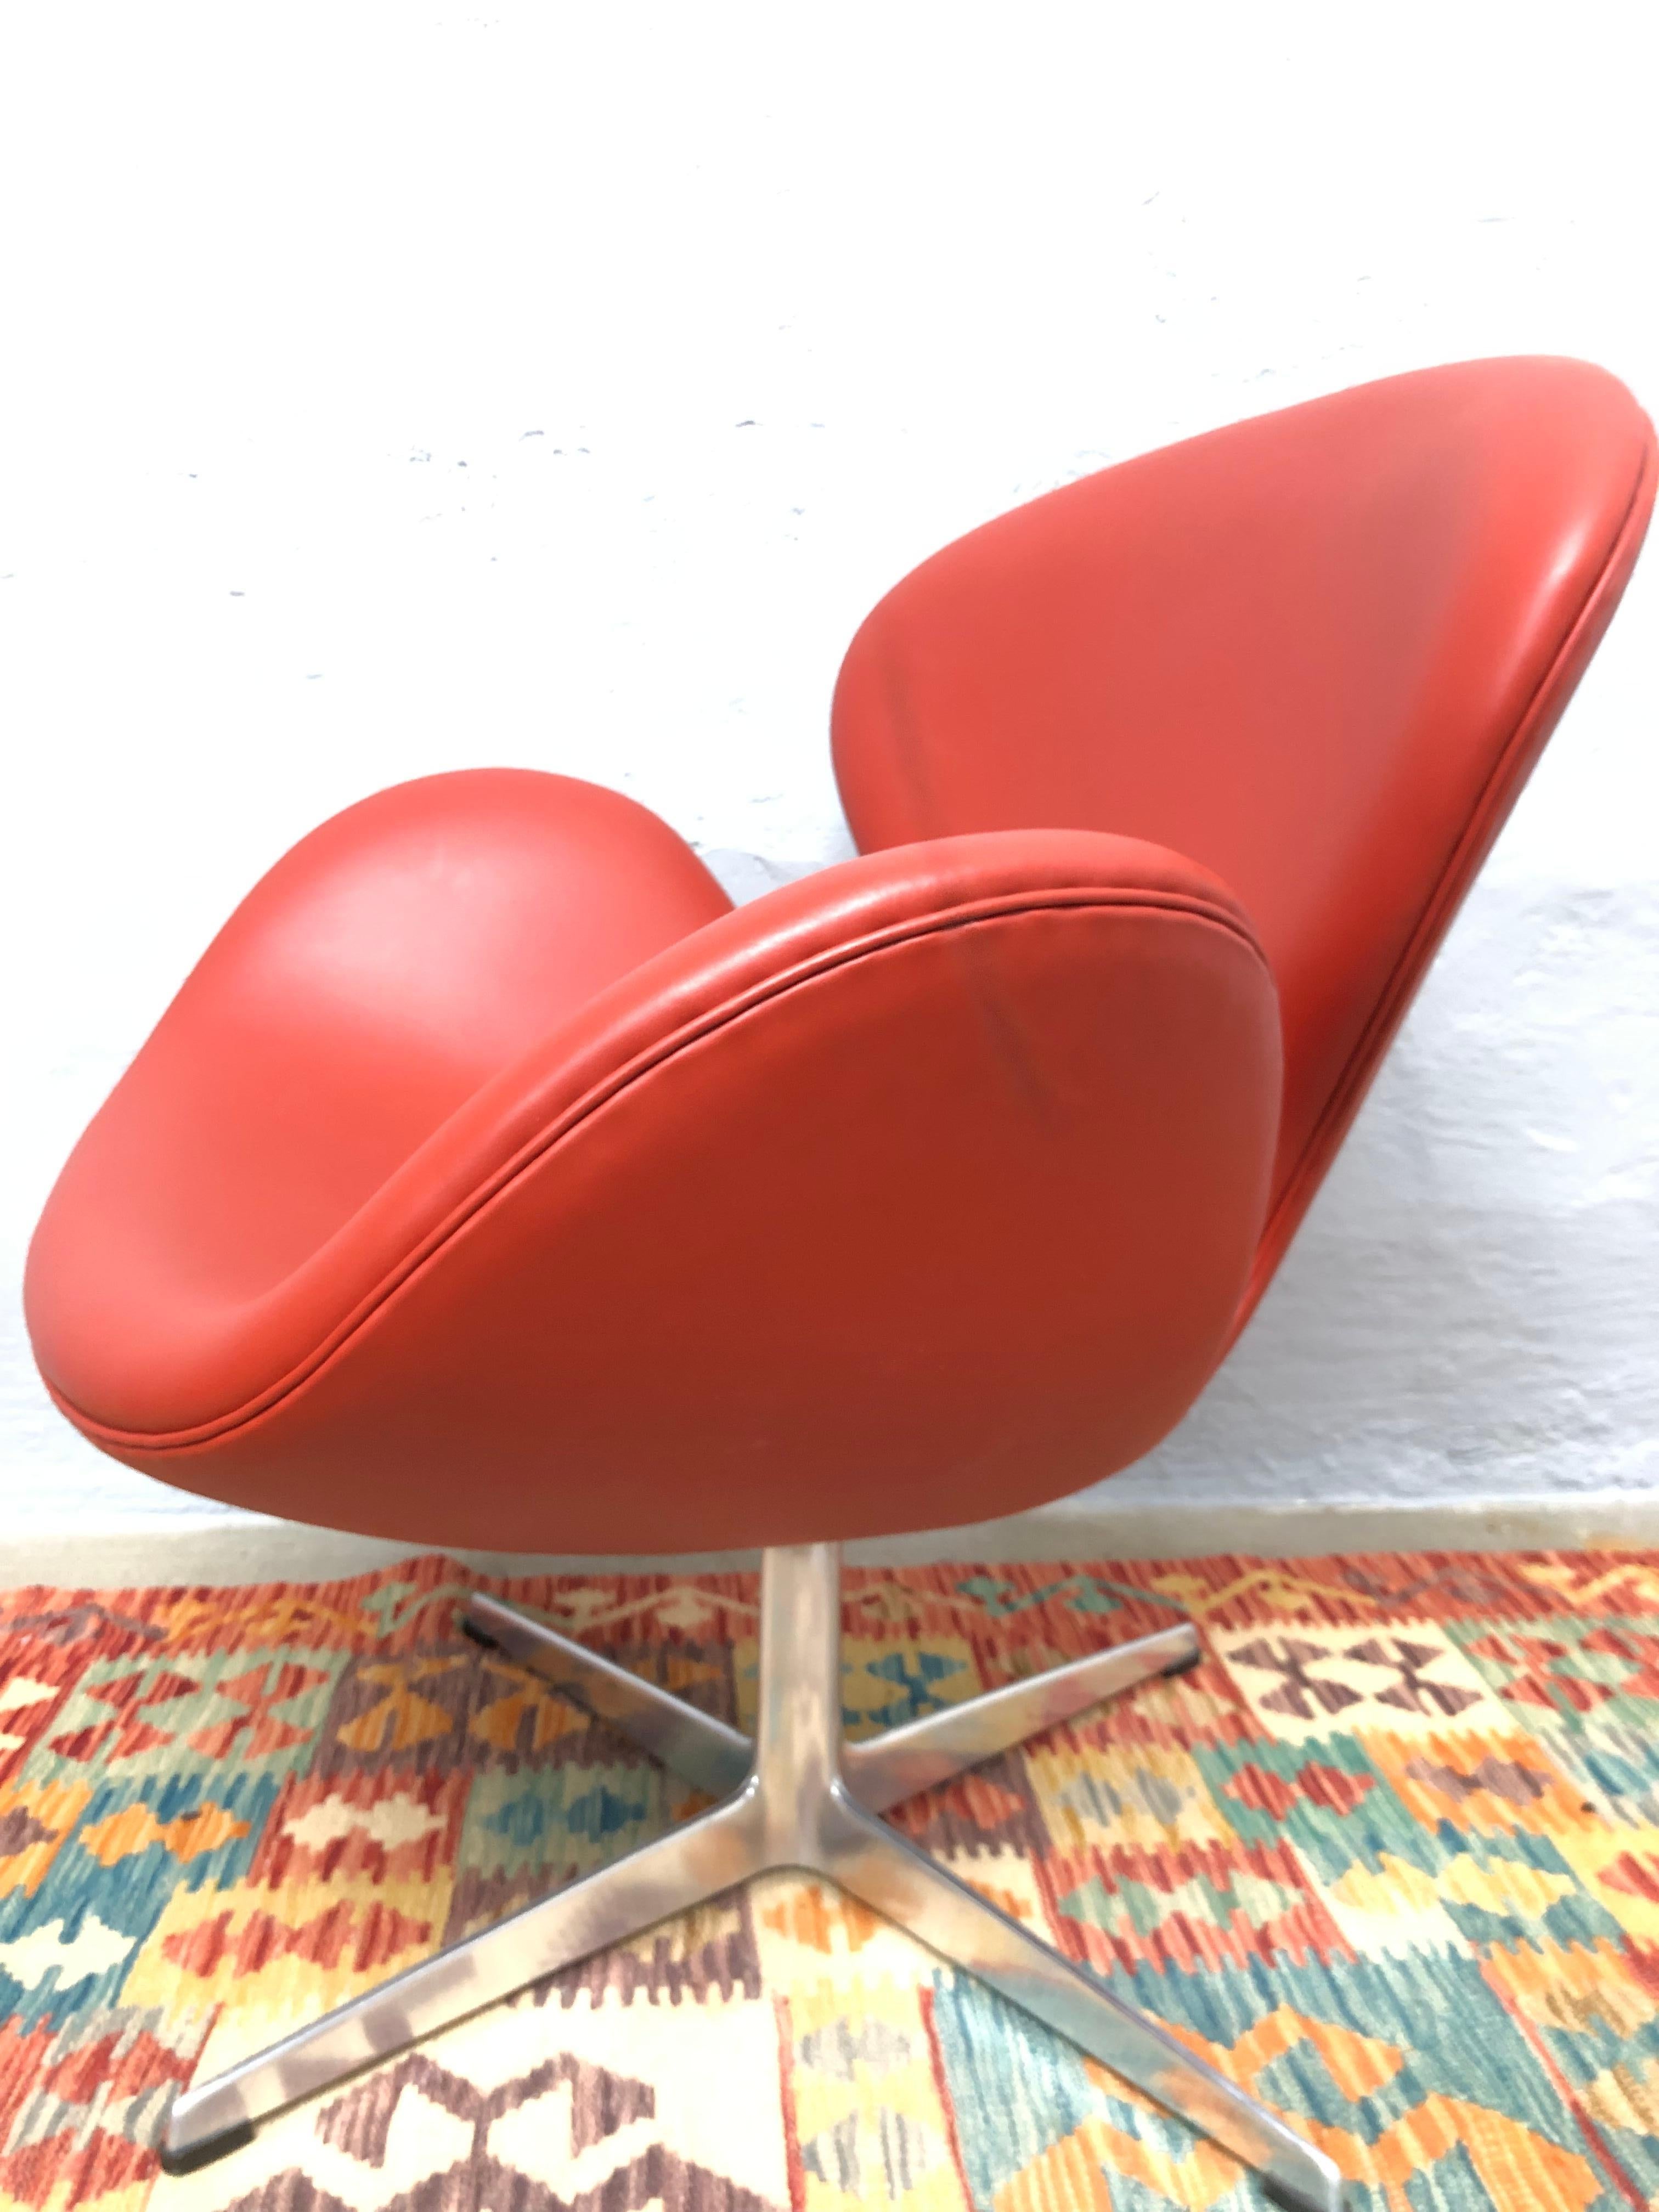 Leather Vintage Iconic First Edition Arne Jacobsen 3320 Lounge Chair Designed in 1958